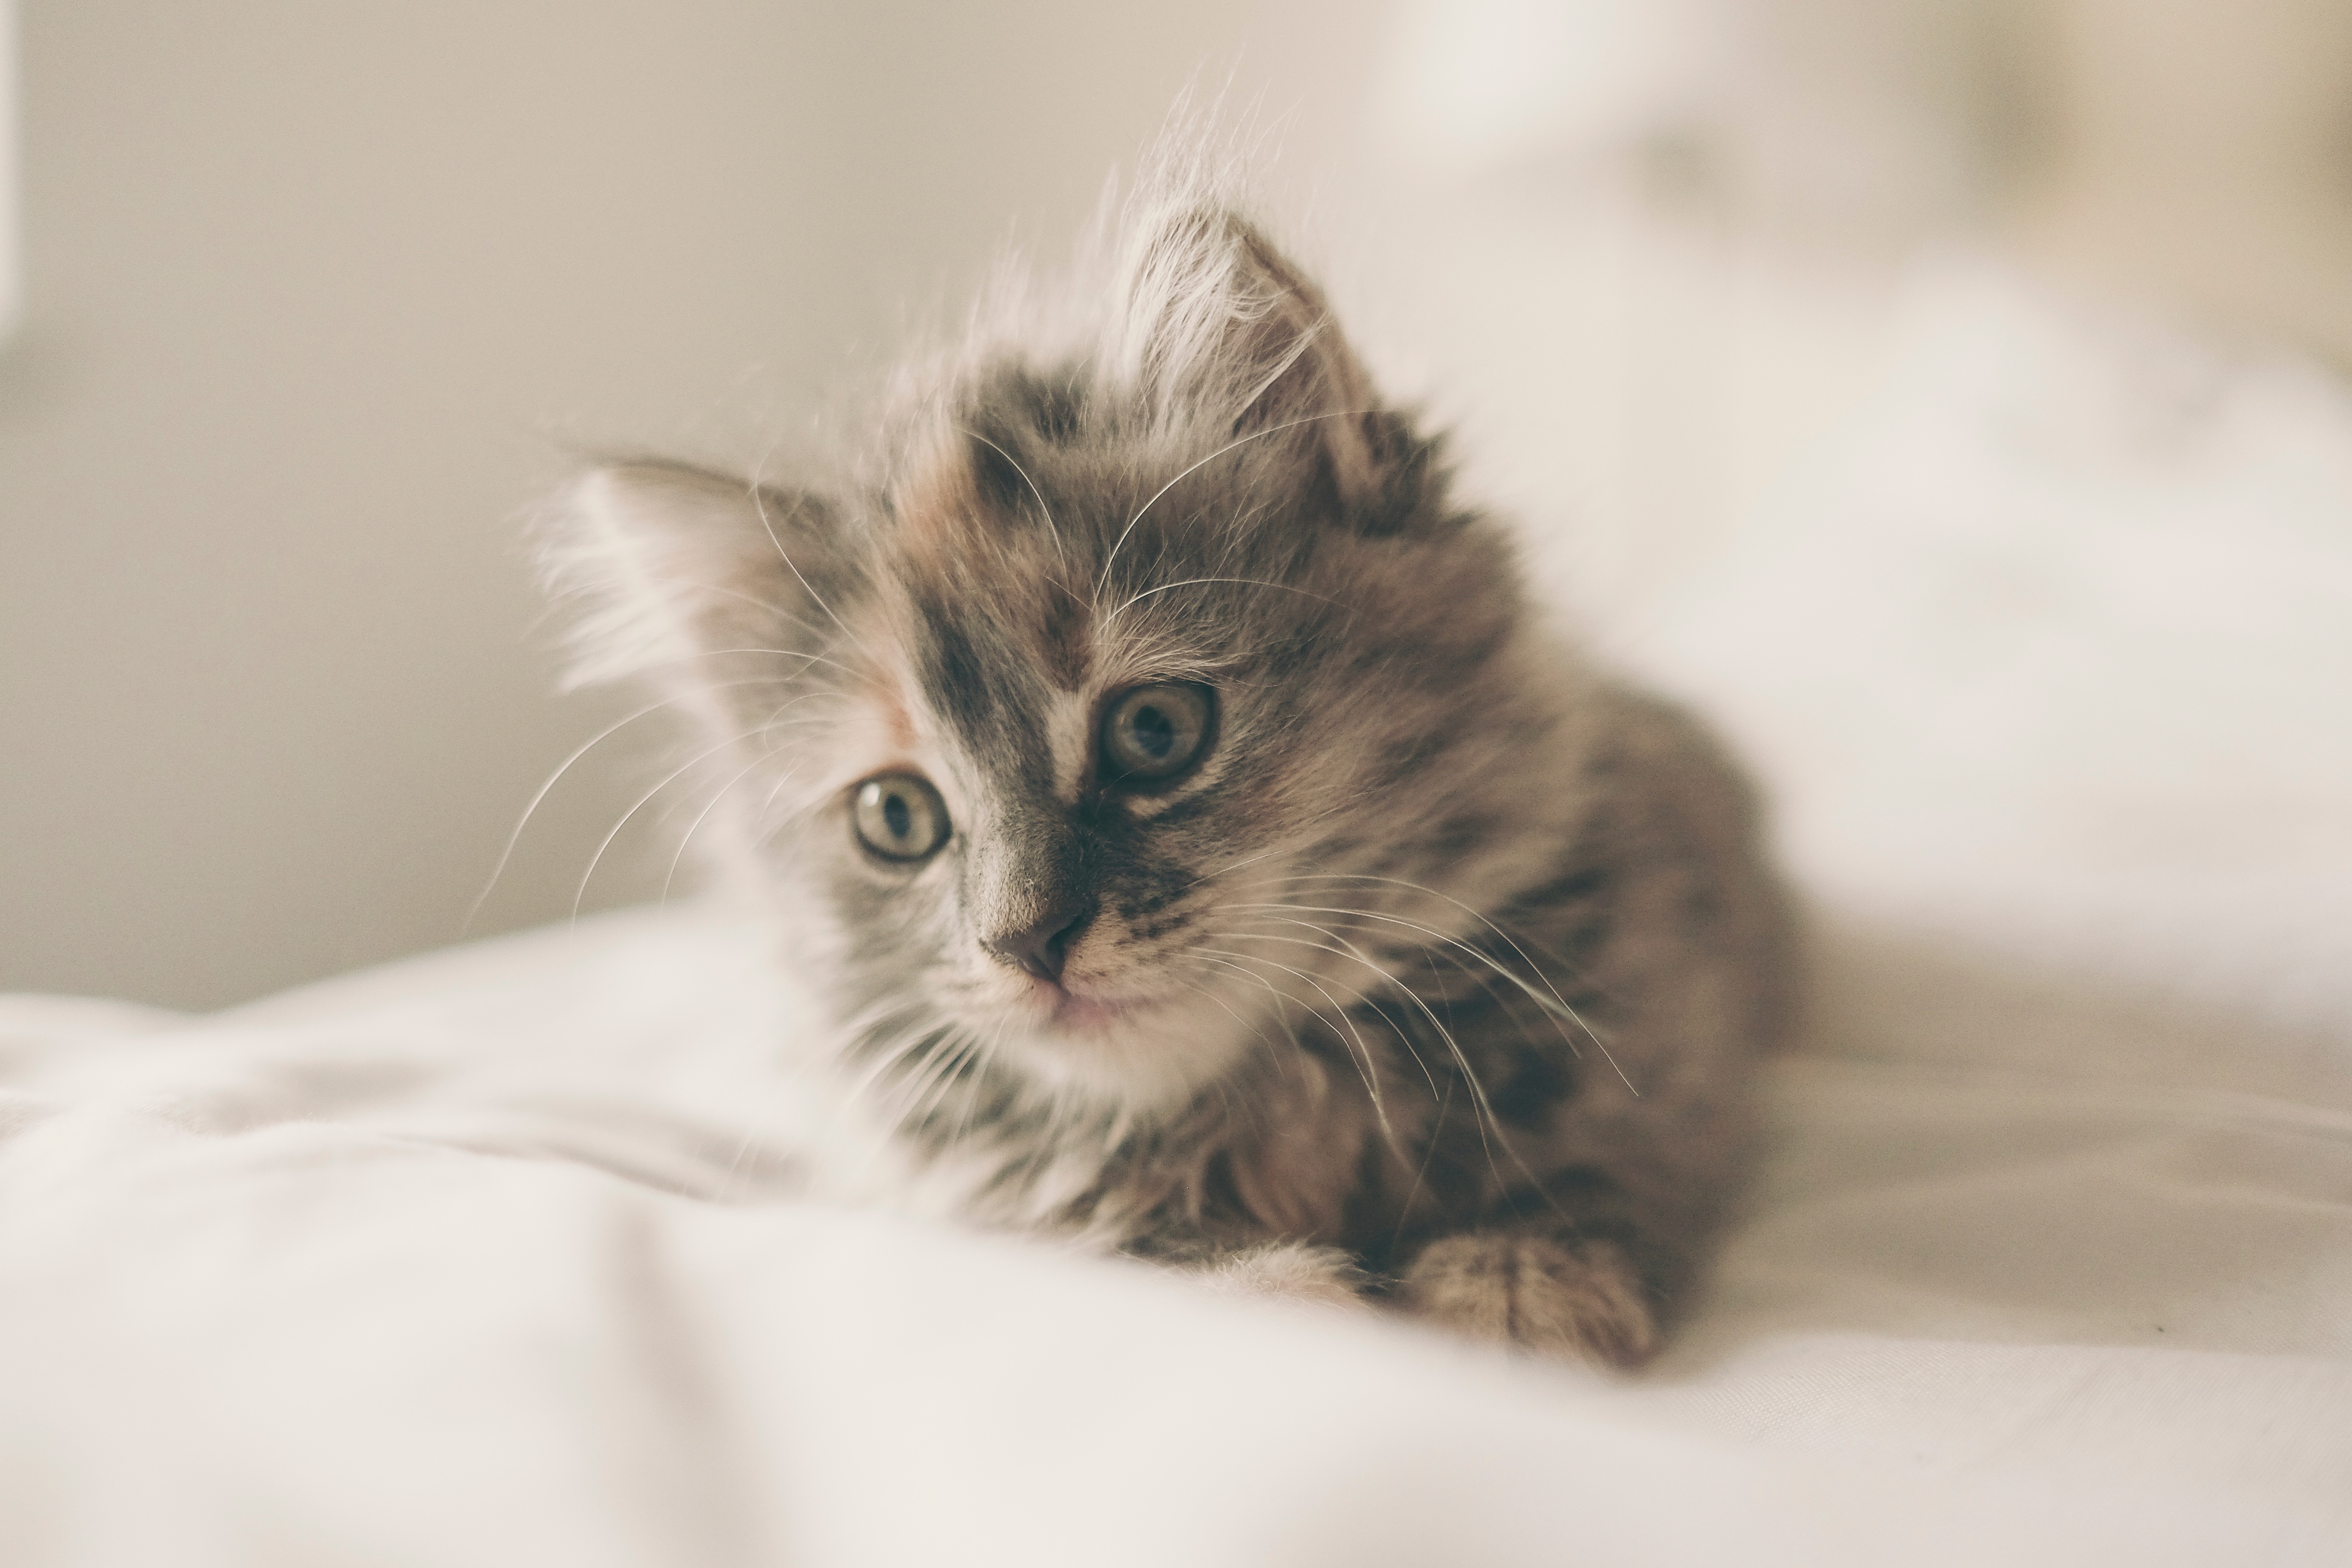 A fluffy kitten lying on the bed